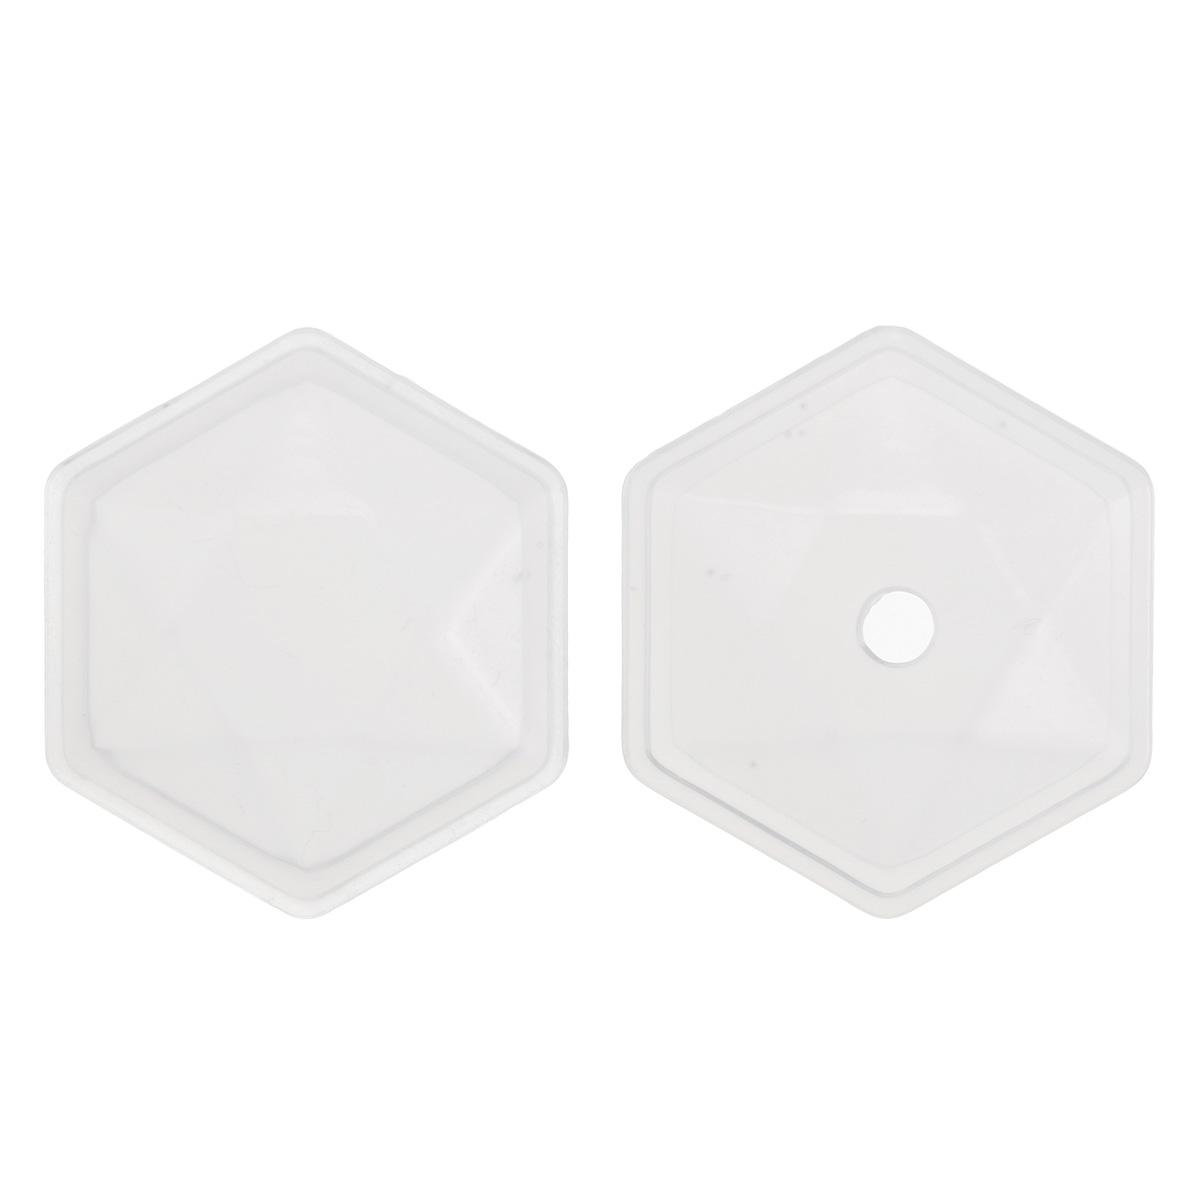 98Pcs-DIY-Silicone-Pendant-Mold-Jewelry-Making-Cube-Resin-Casting-Molds-Craft-Tools-Kit-1517942-8